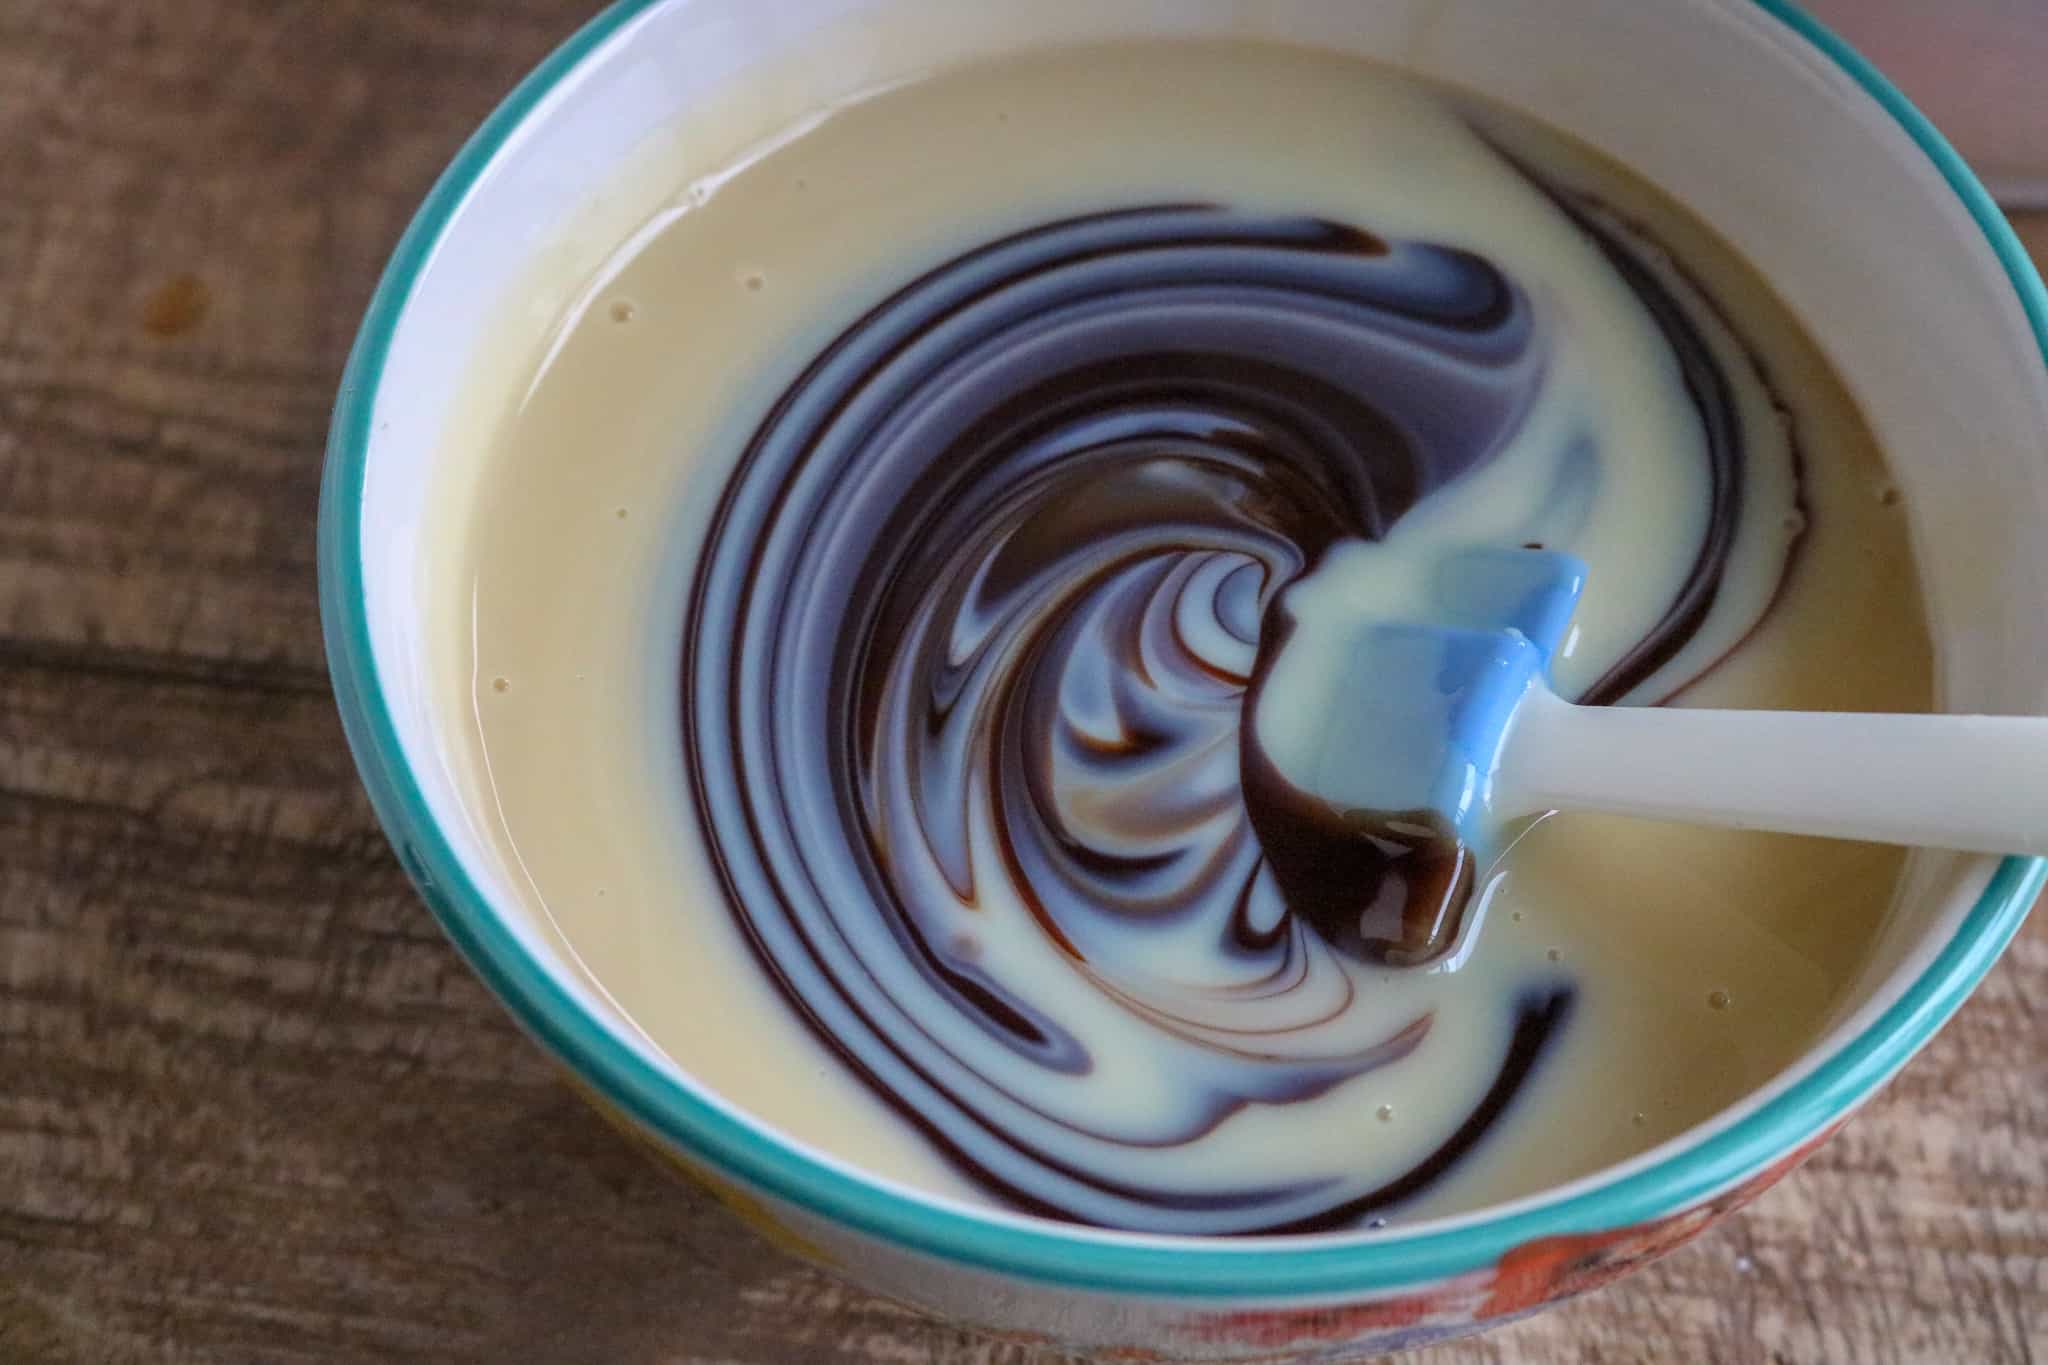 Mixing together the sweetened condensed milk and the chocolate syrup